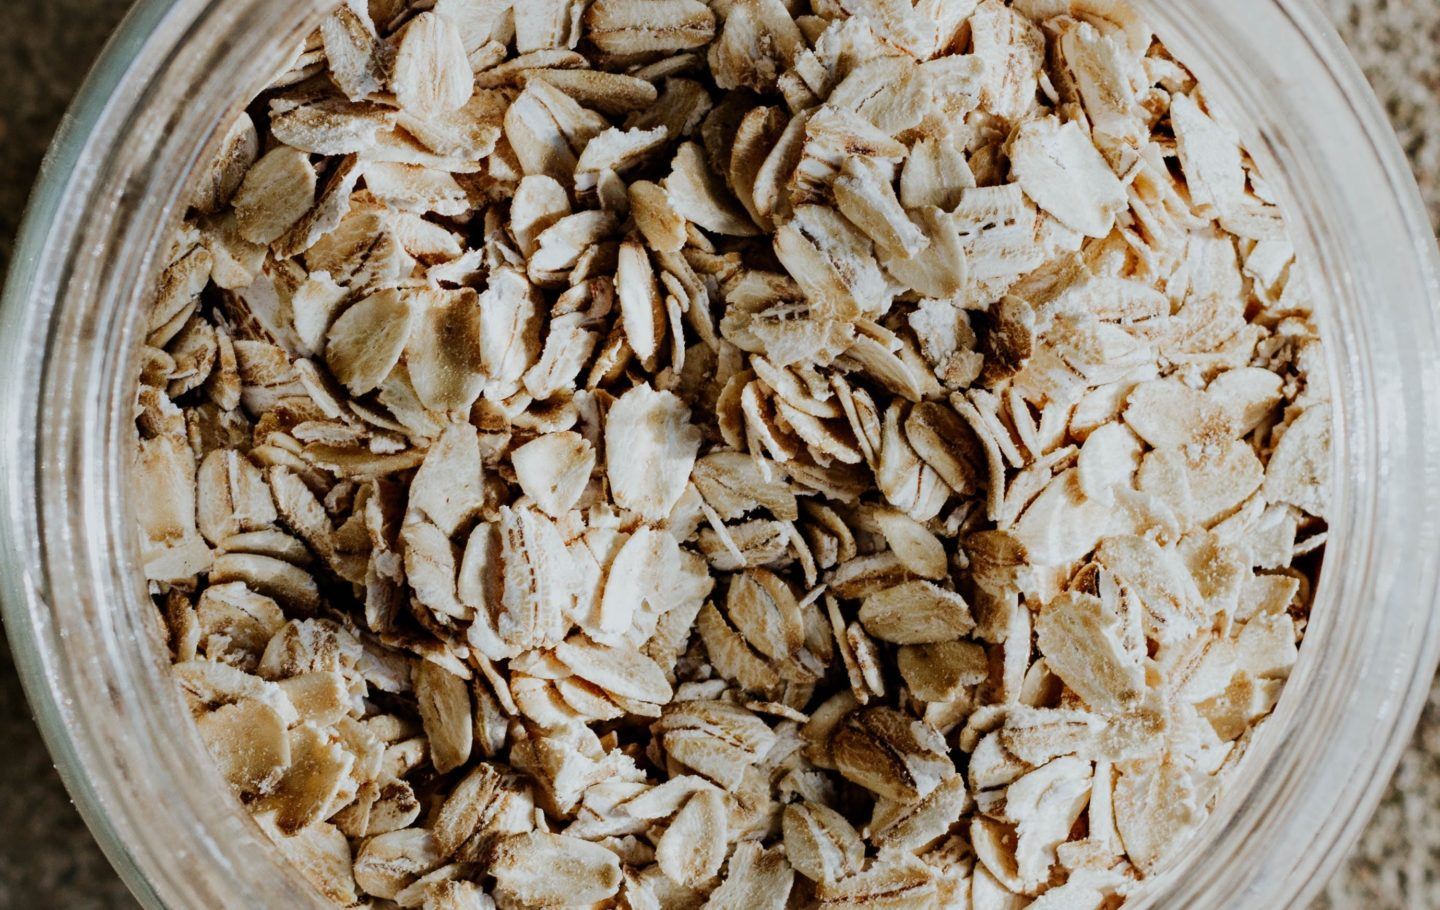 Raw Oats, ready to be cooked